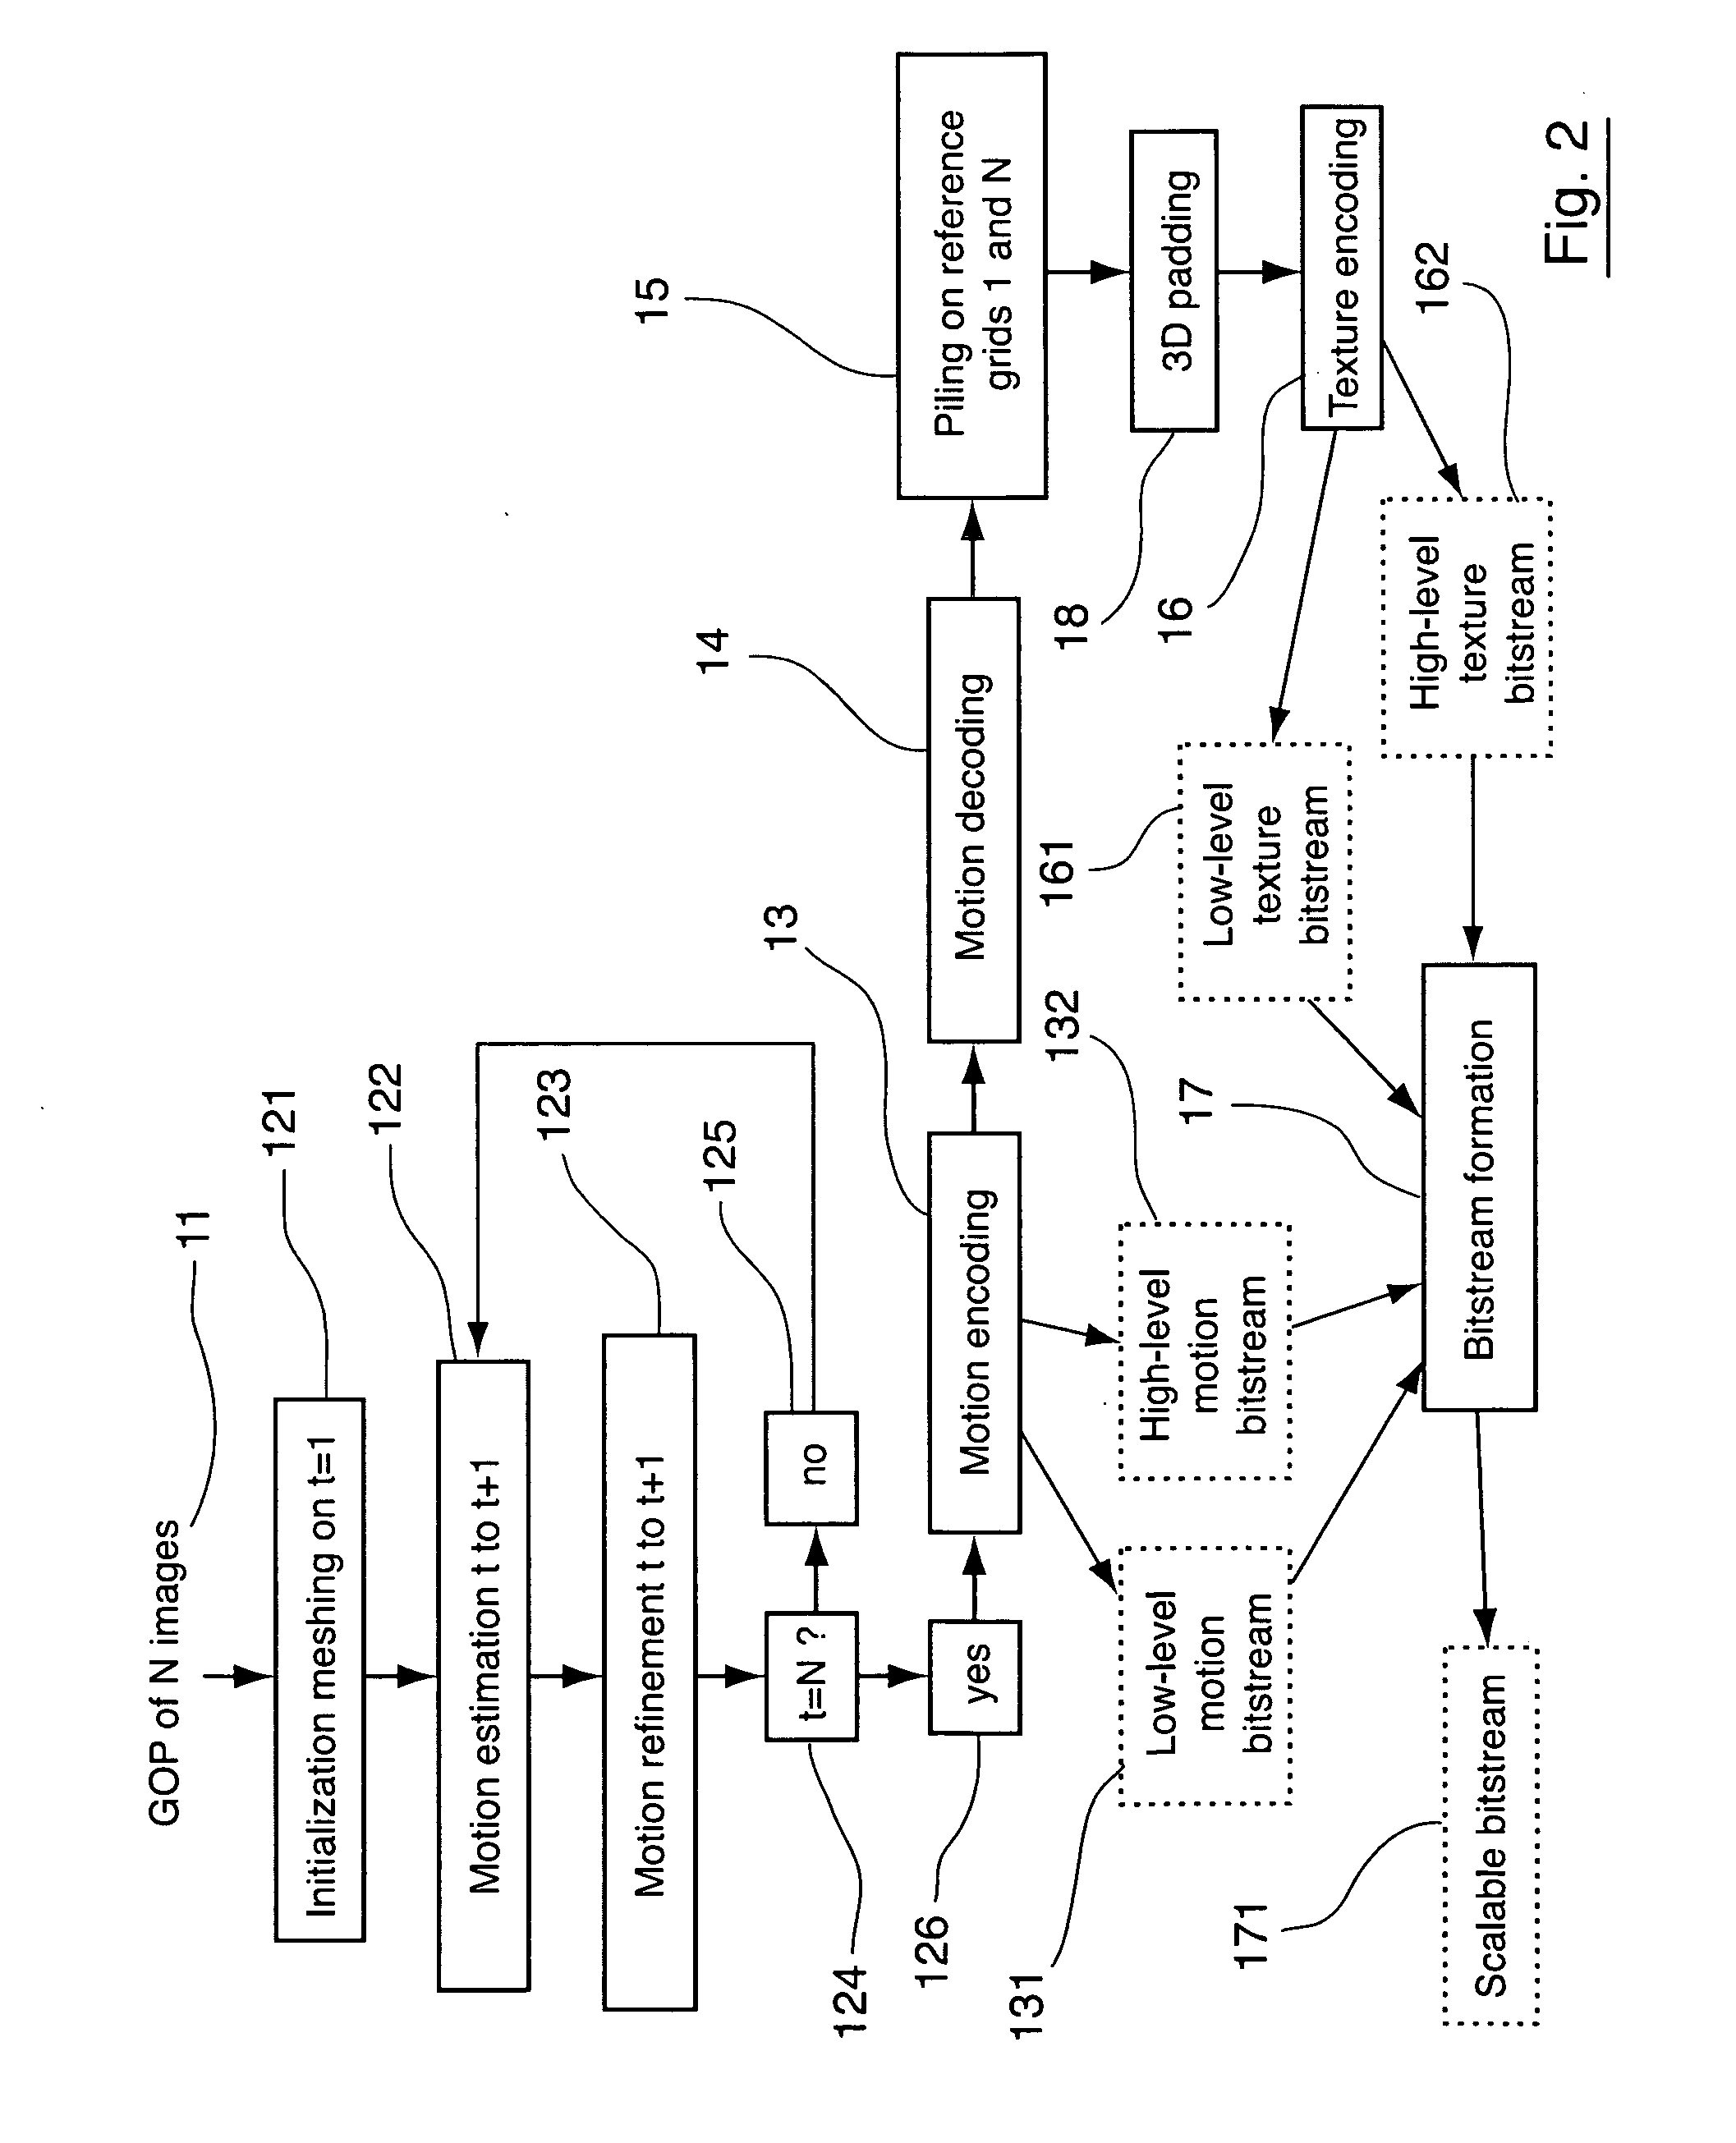 Methods and devices for encoding and decoding a sequence of images by means of motion/texture decomposition and wavelet encoding